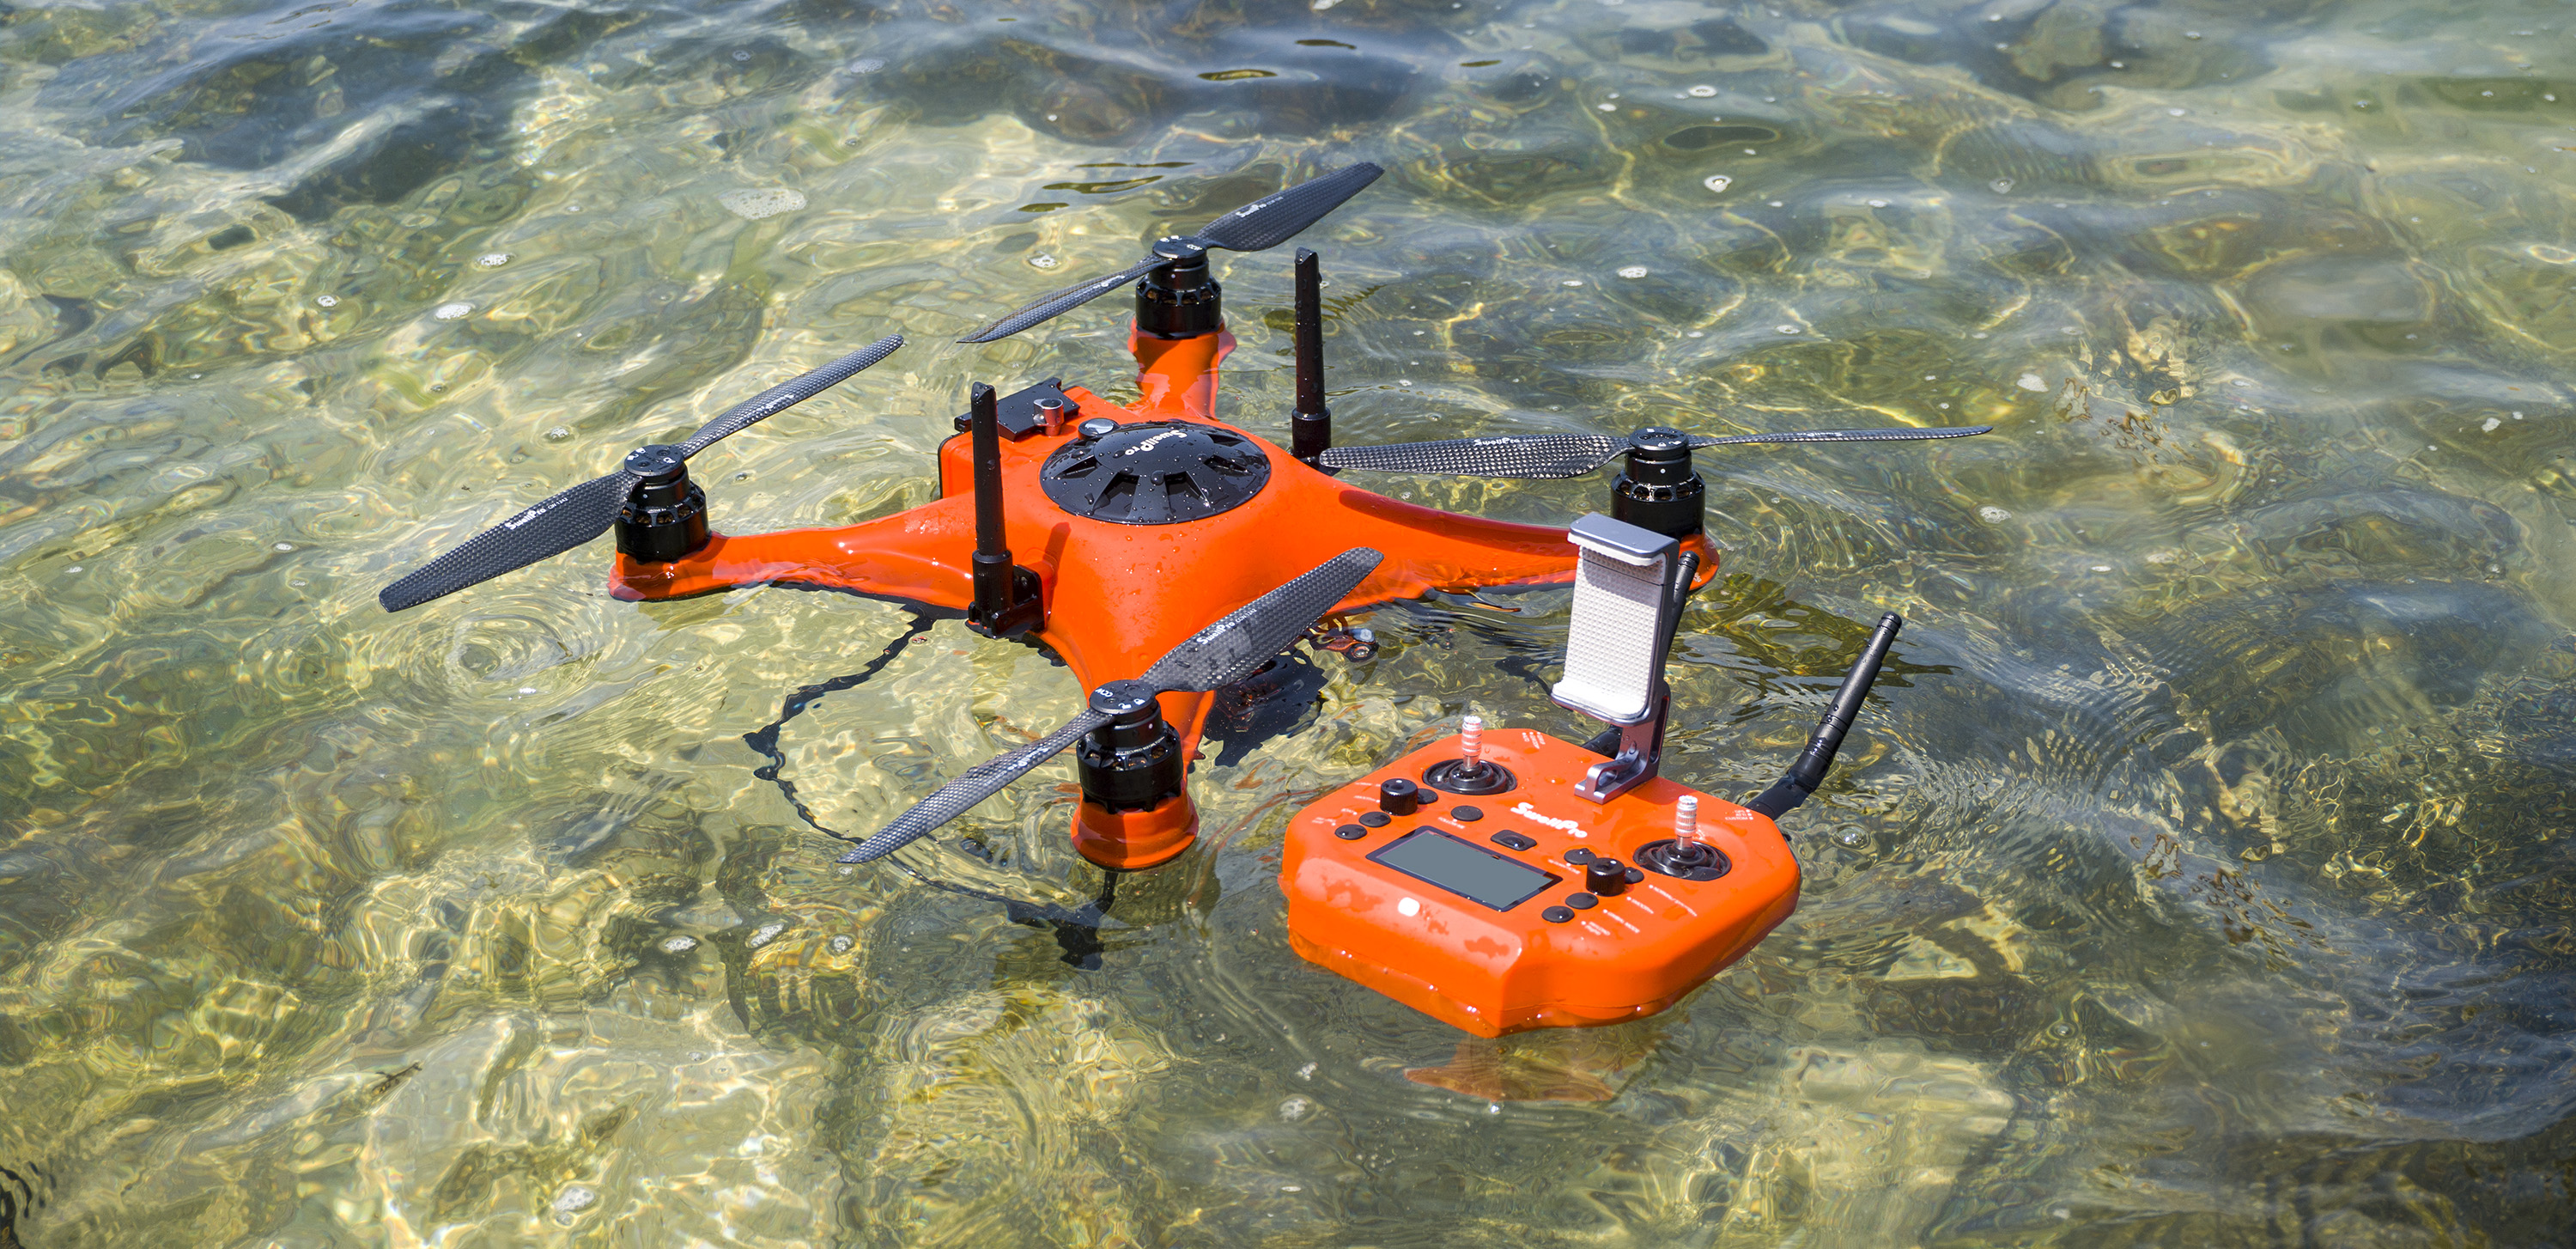 can drones be used for fishing